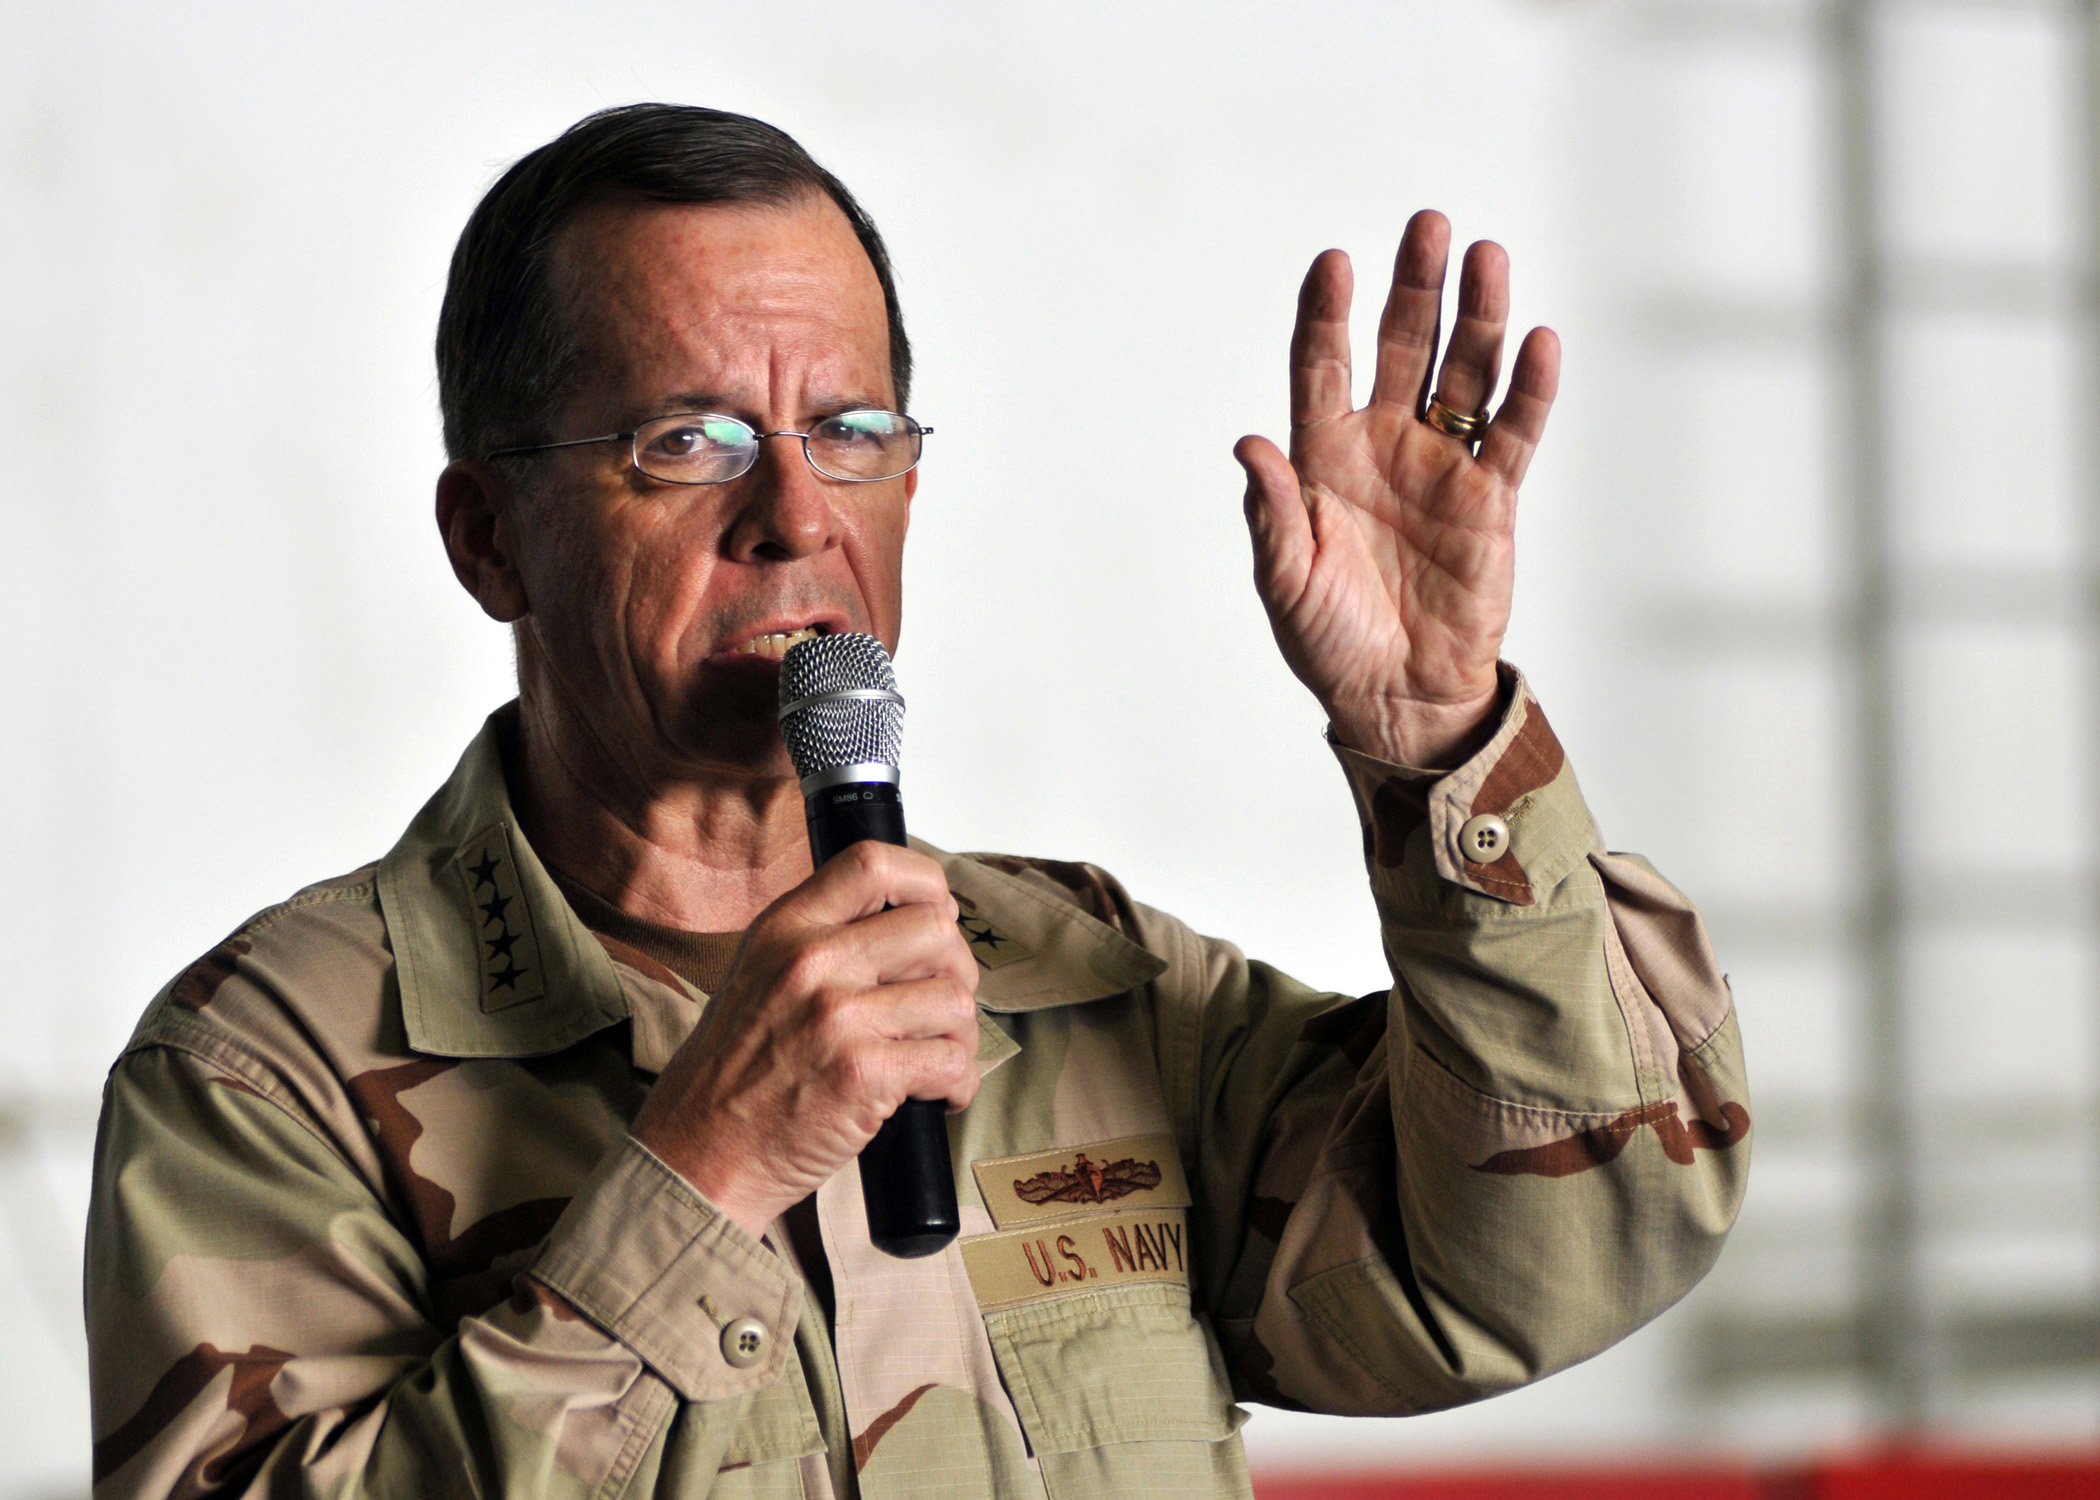 US Navy 080827-N-7981E-276 Chairman, Joint Chiefs of Staff Adm. Mike Mullen addresses Sailors in the hangar bay of the aircraft carrier USS Abraham Lincoln (CVN 72)